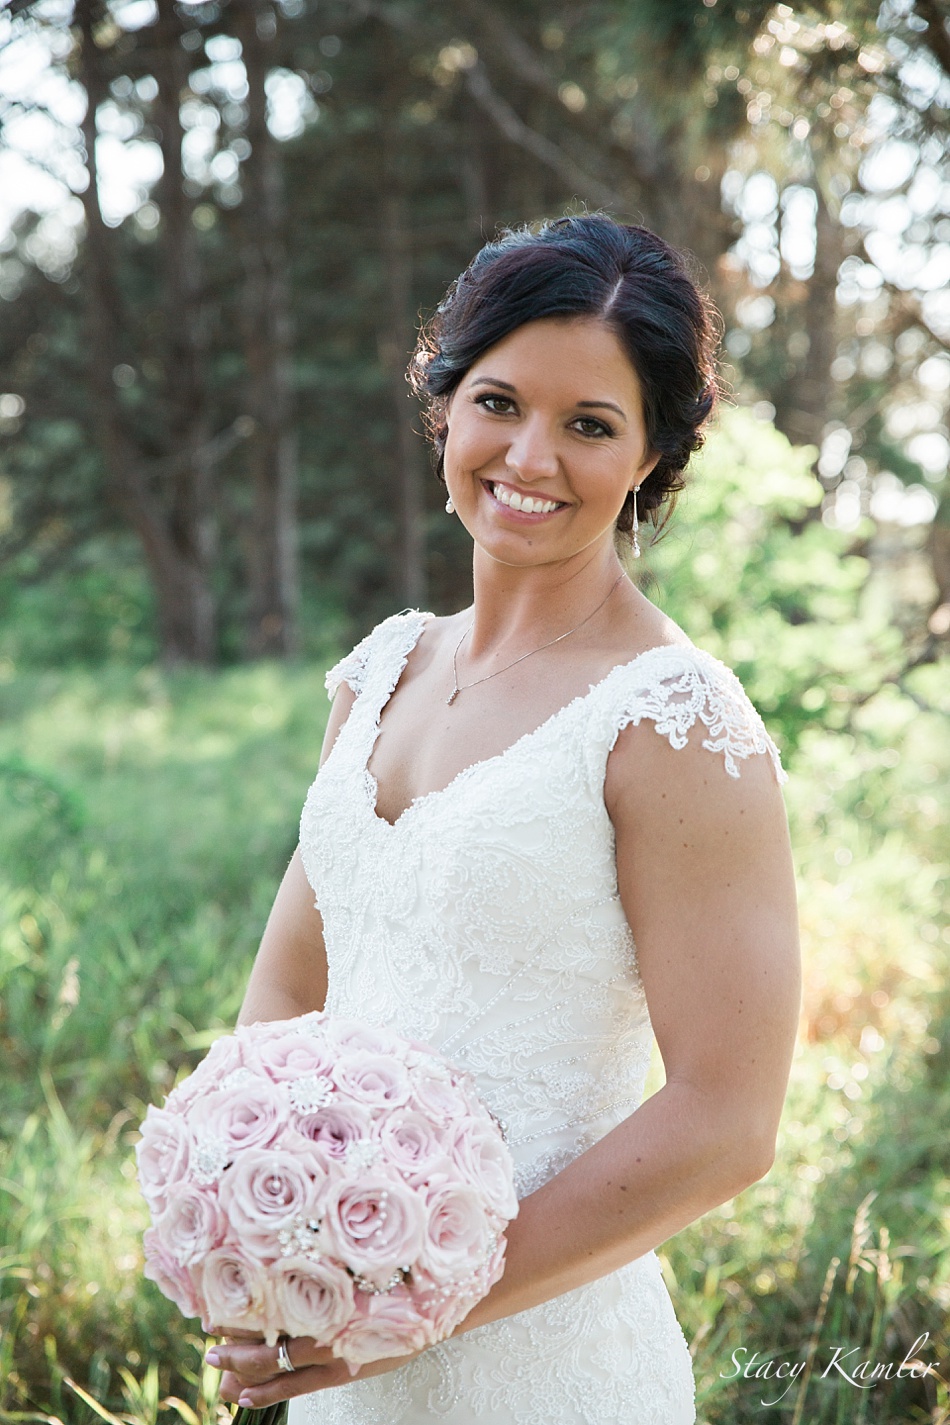 Bride and her pink rose bouquet